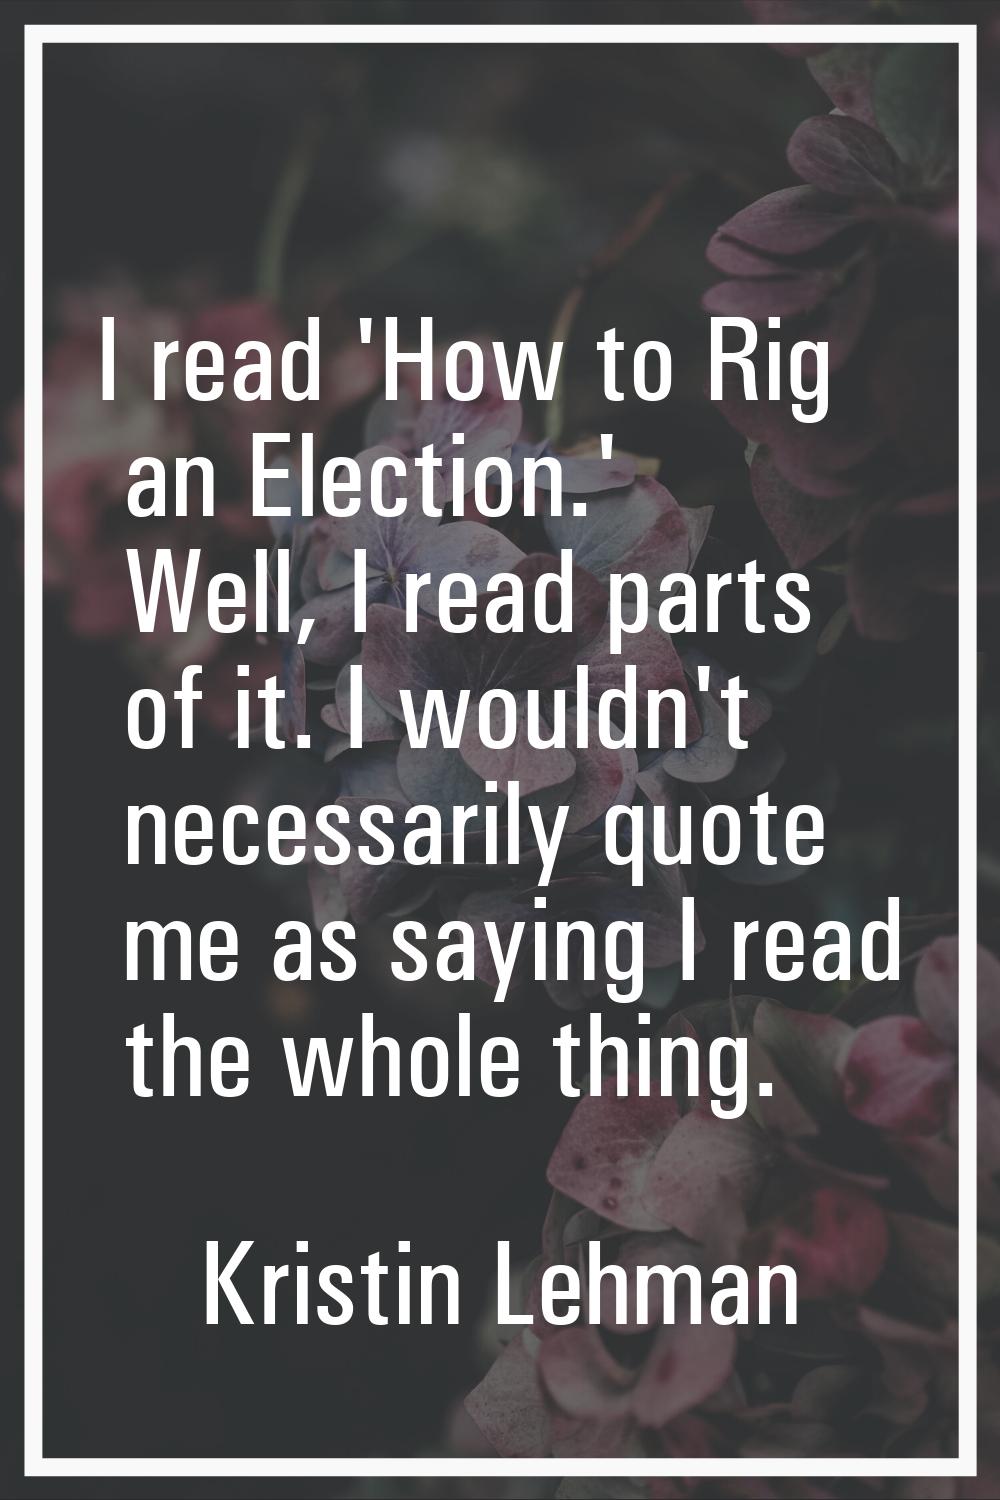 I read 'How to Rig an Election.' Well, I read parts of it. I wouldn't necessarily quote me as sayin